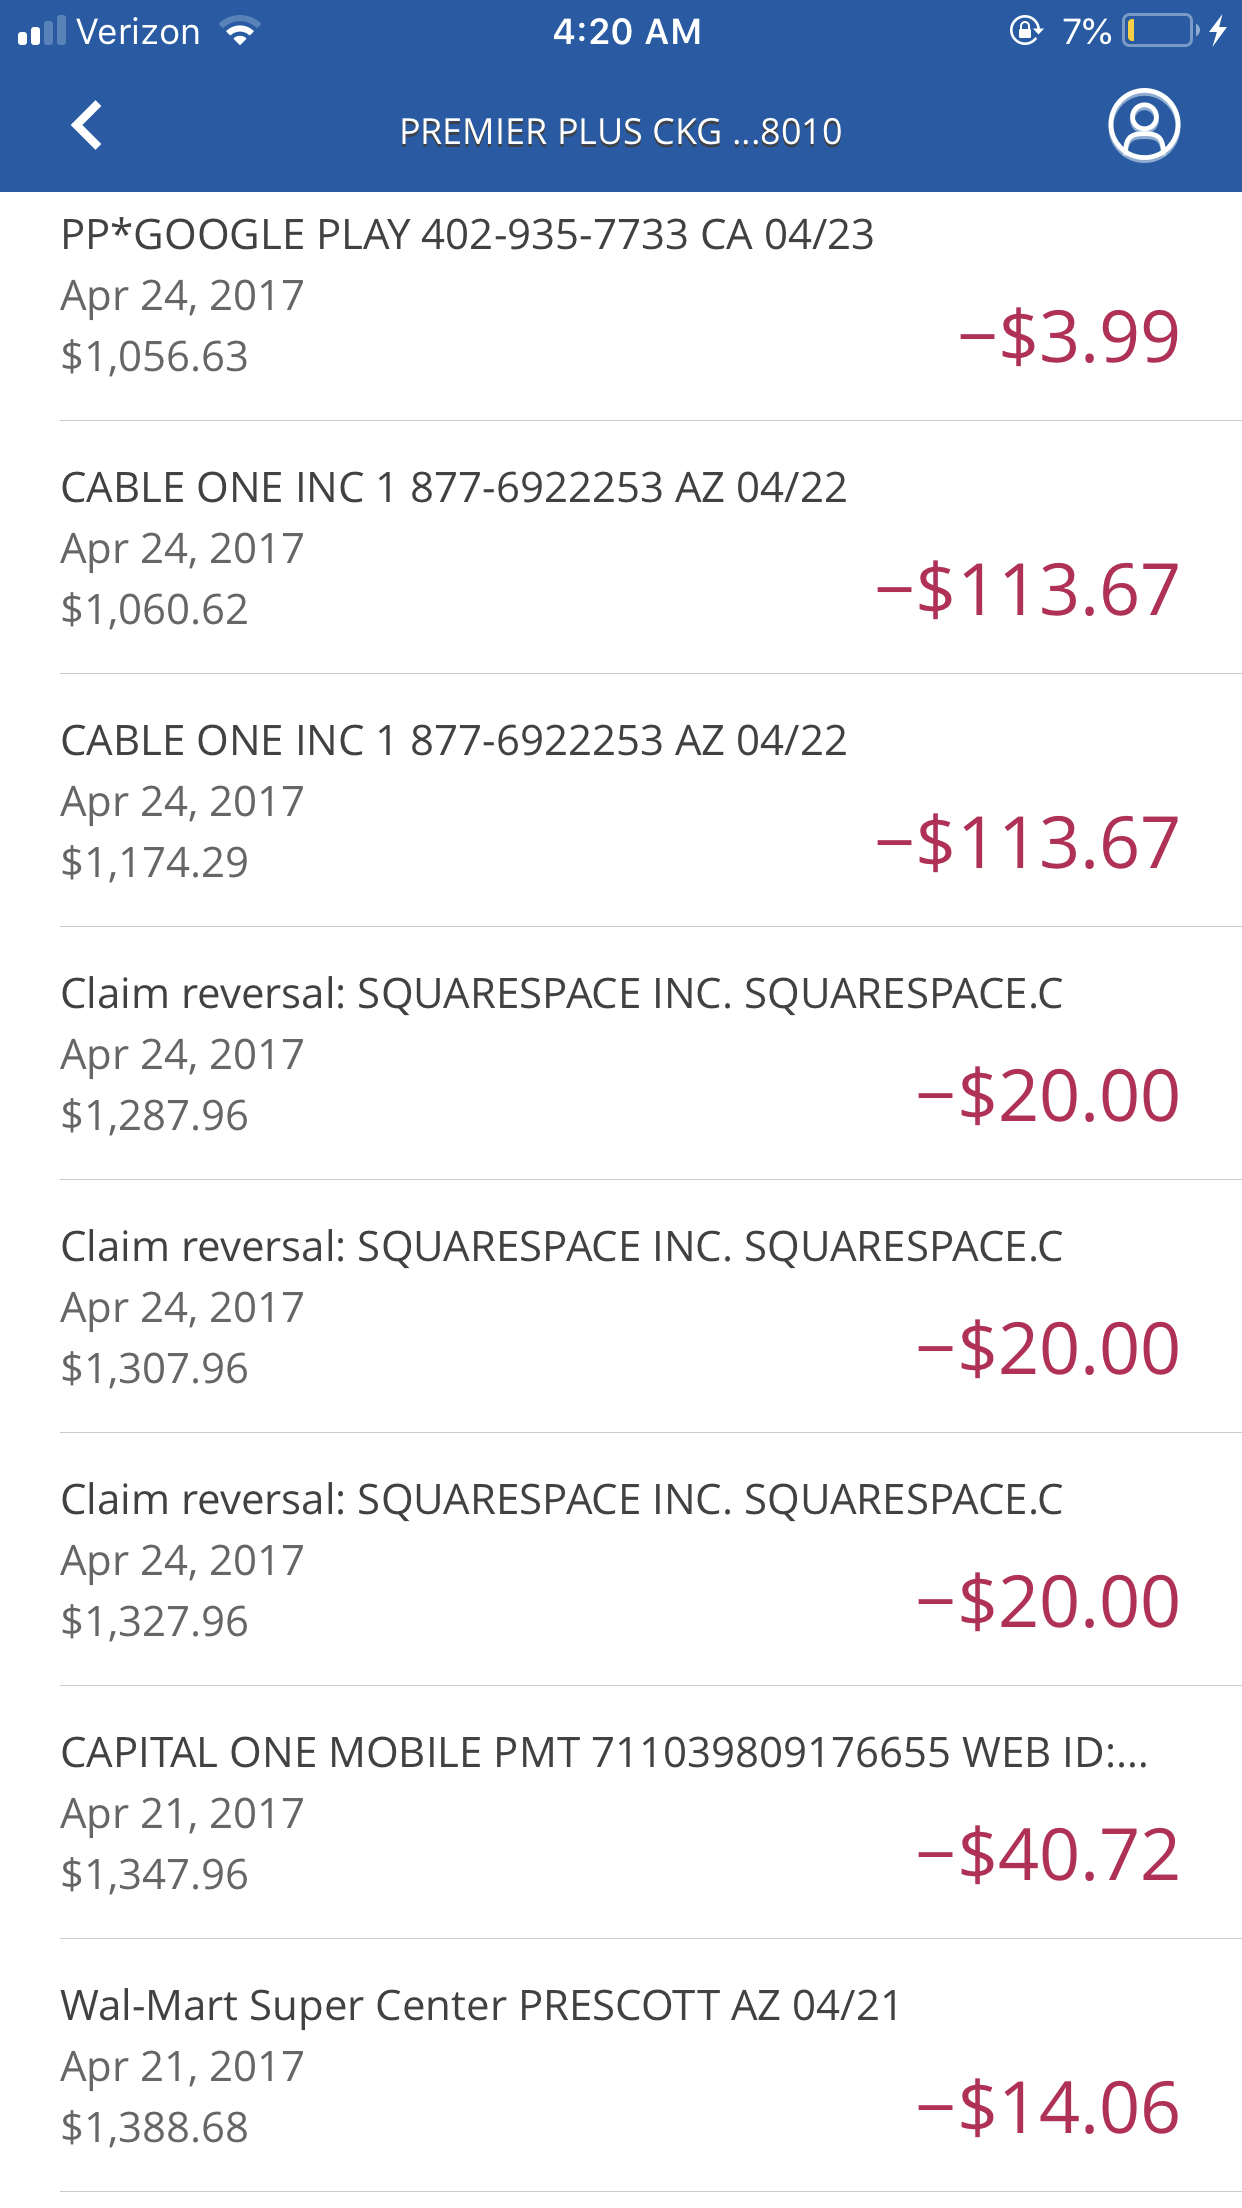 I just realized cable one charged me twice too..